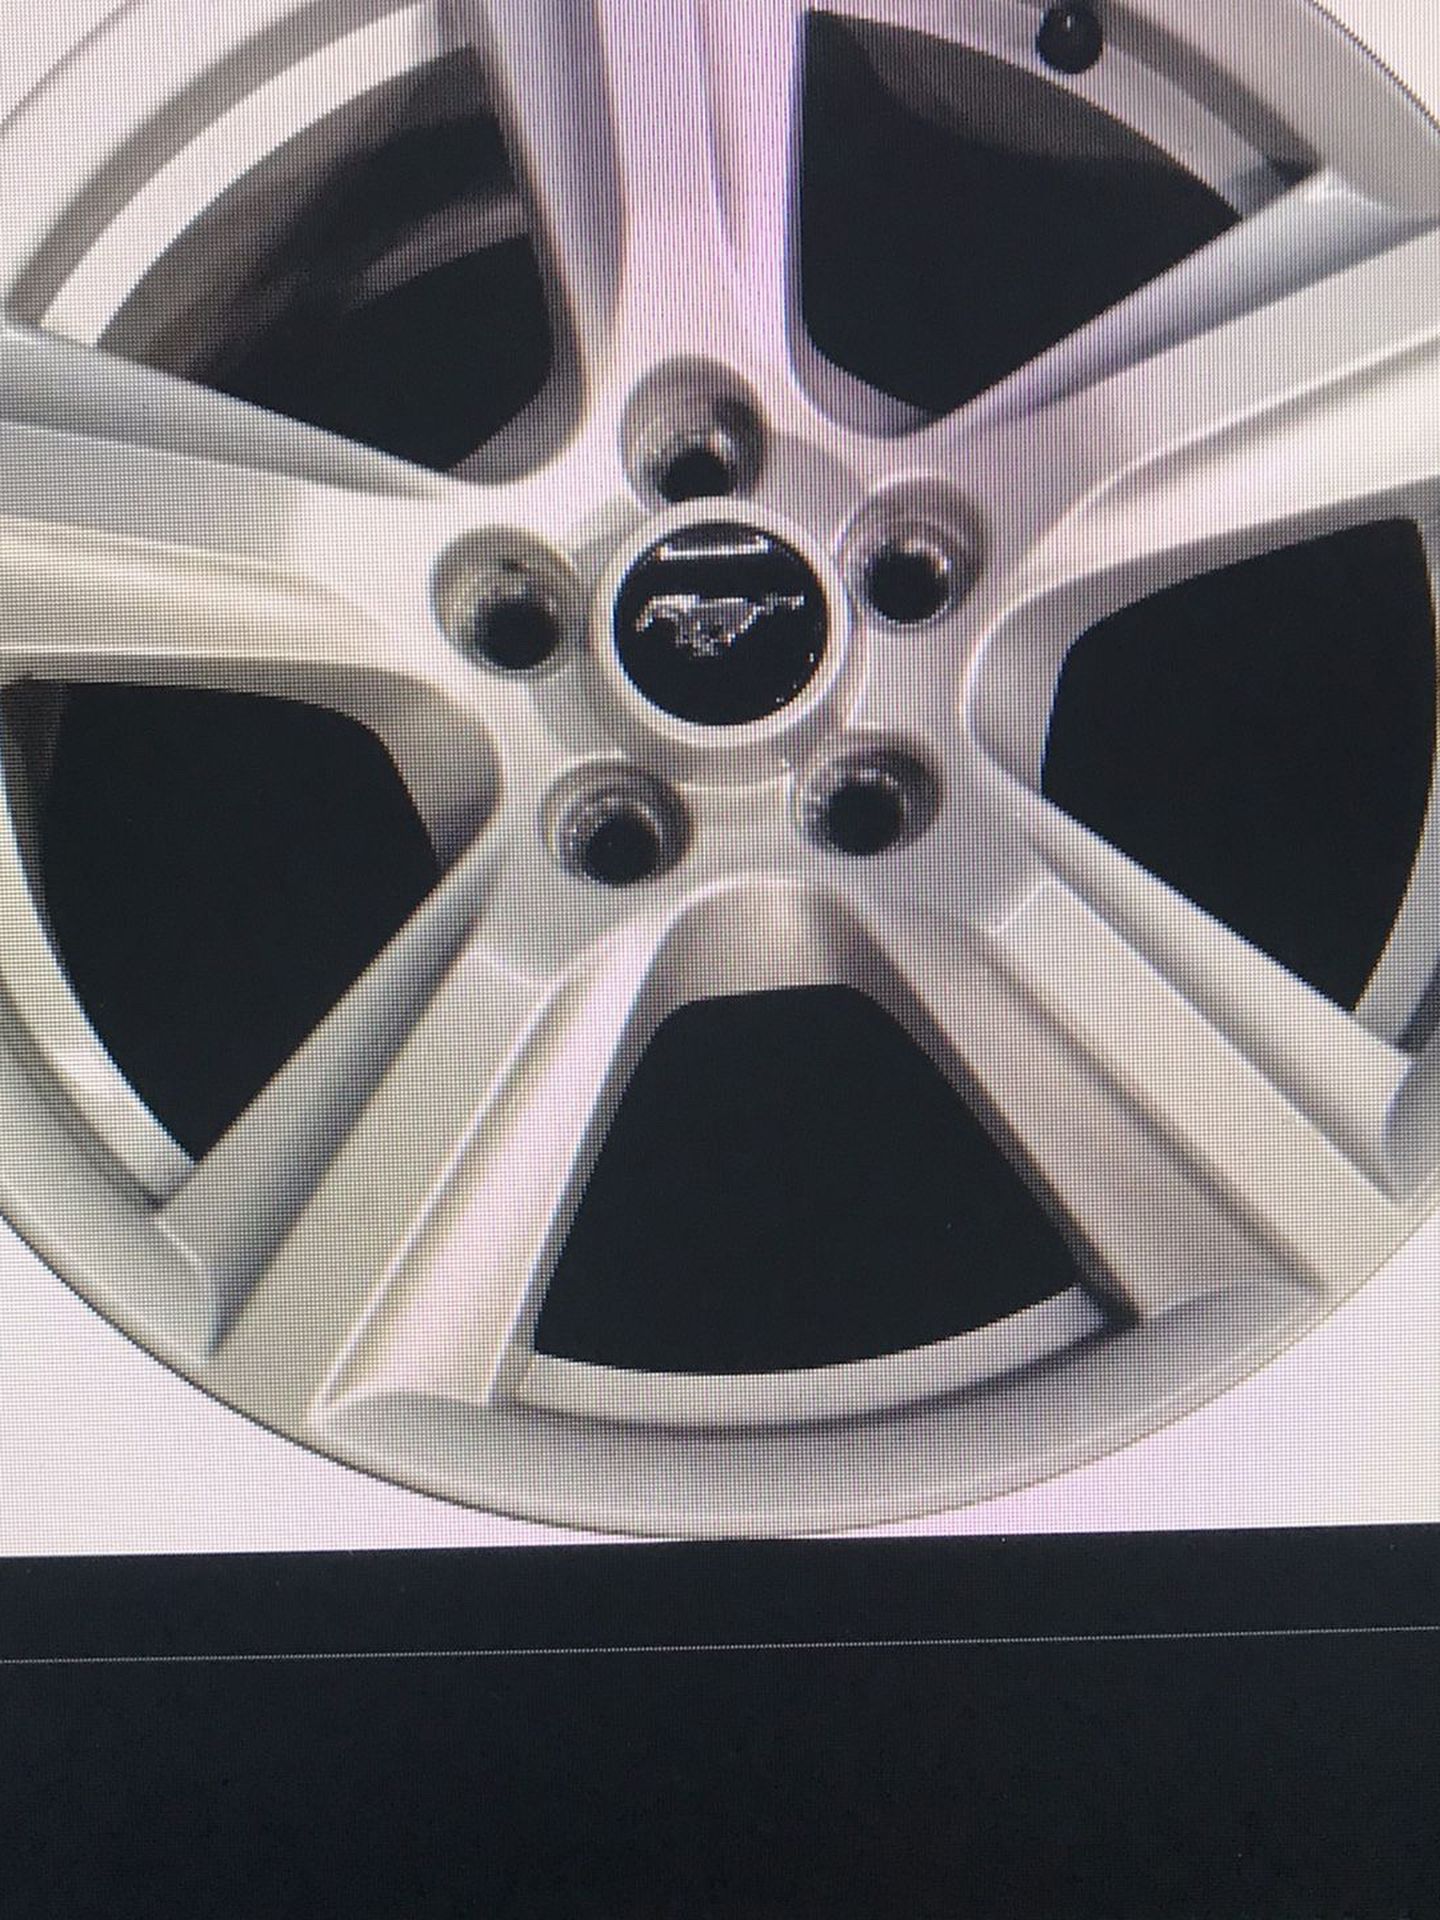 Ford Mustang stock rims100ea all 4 for 200